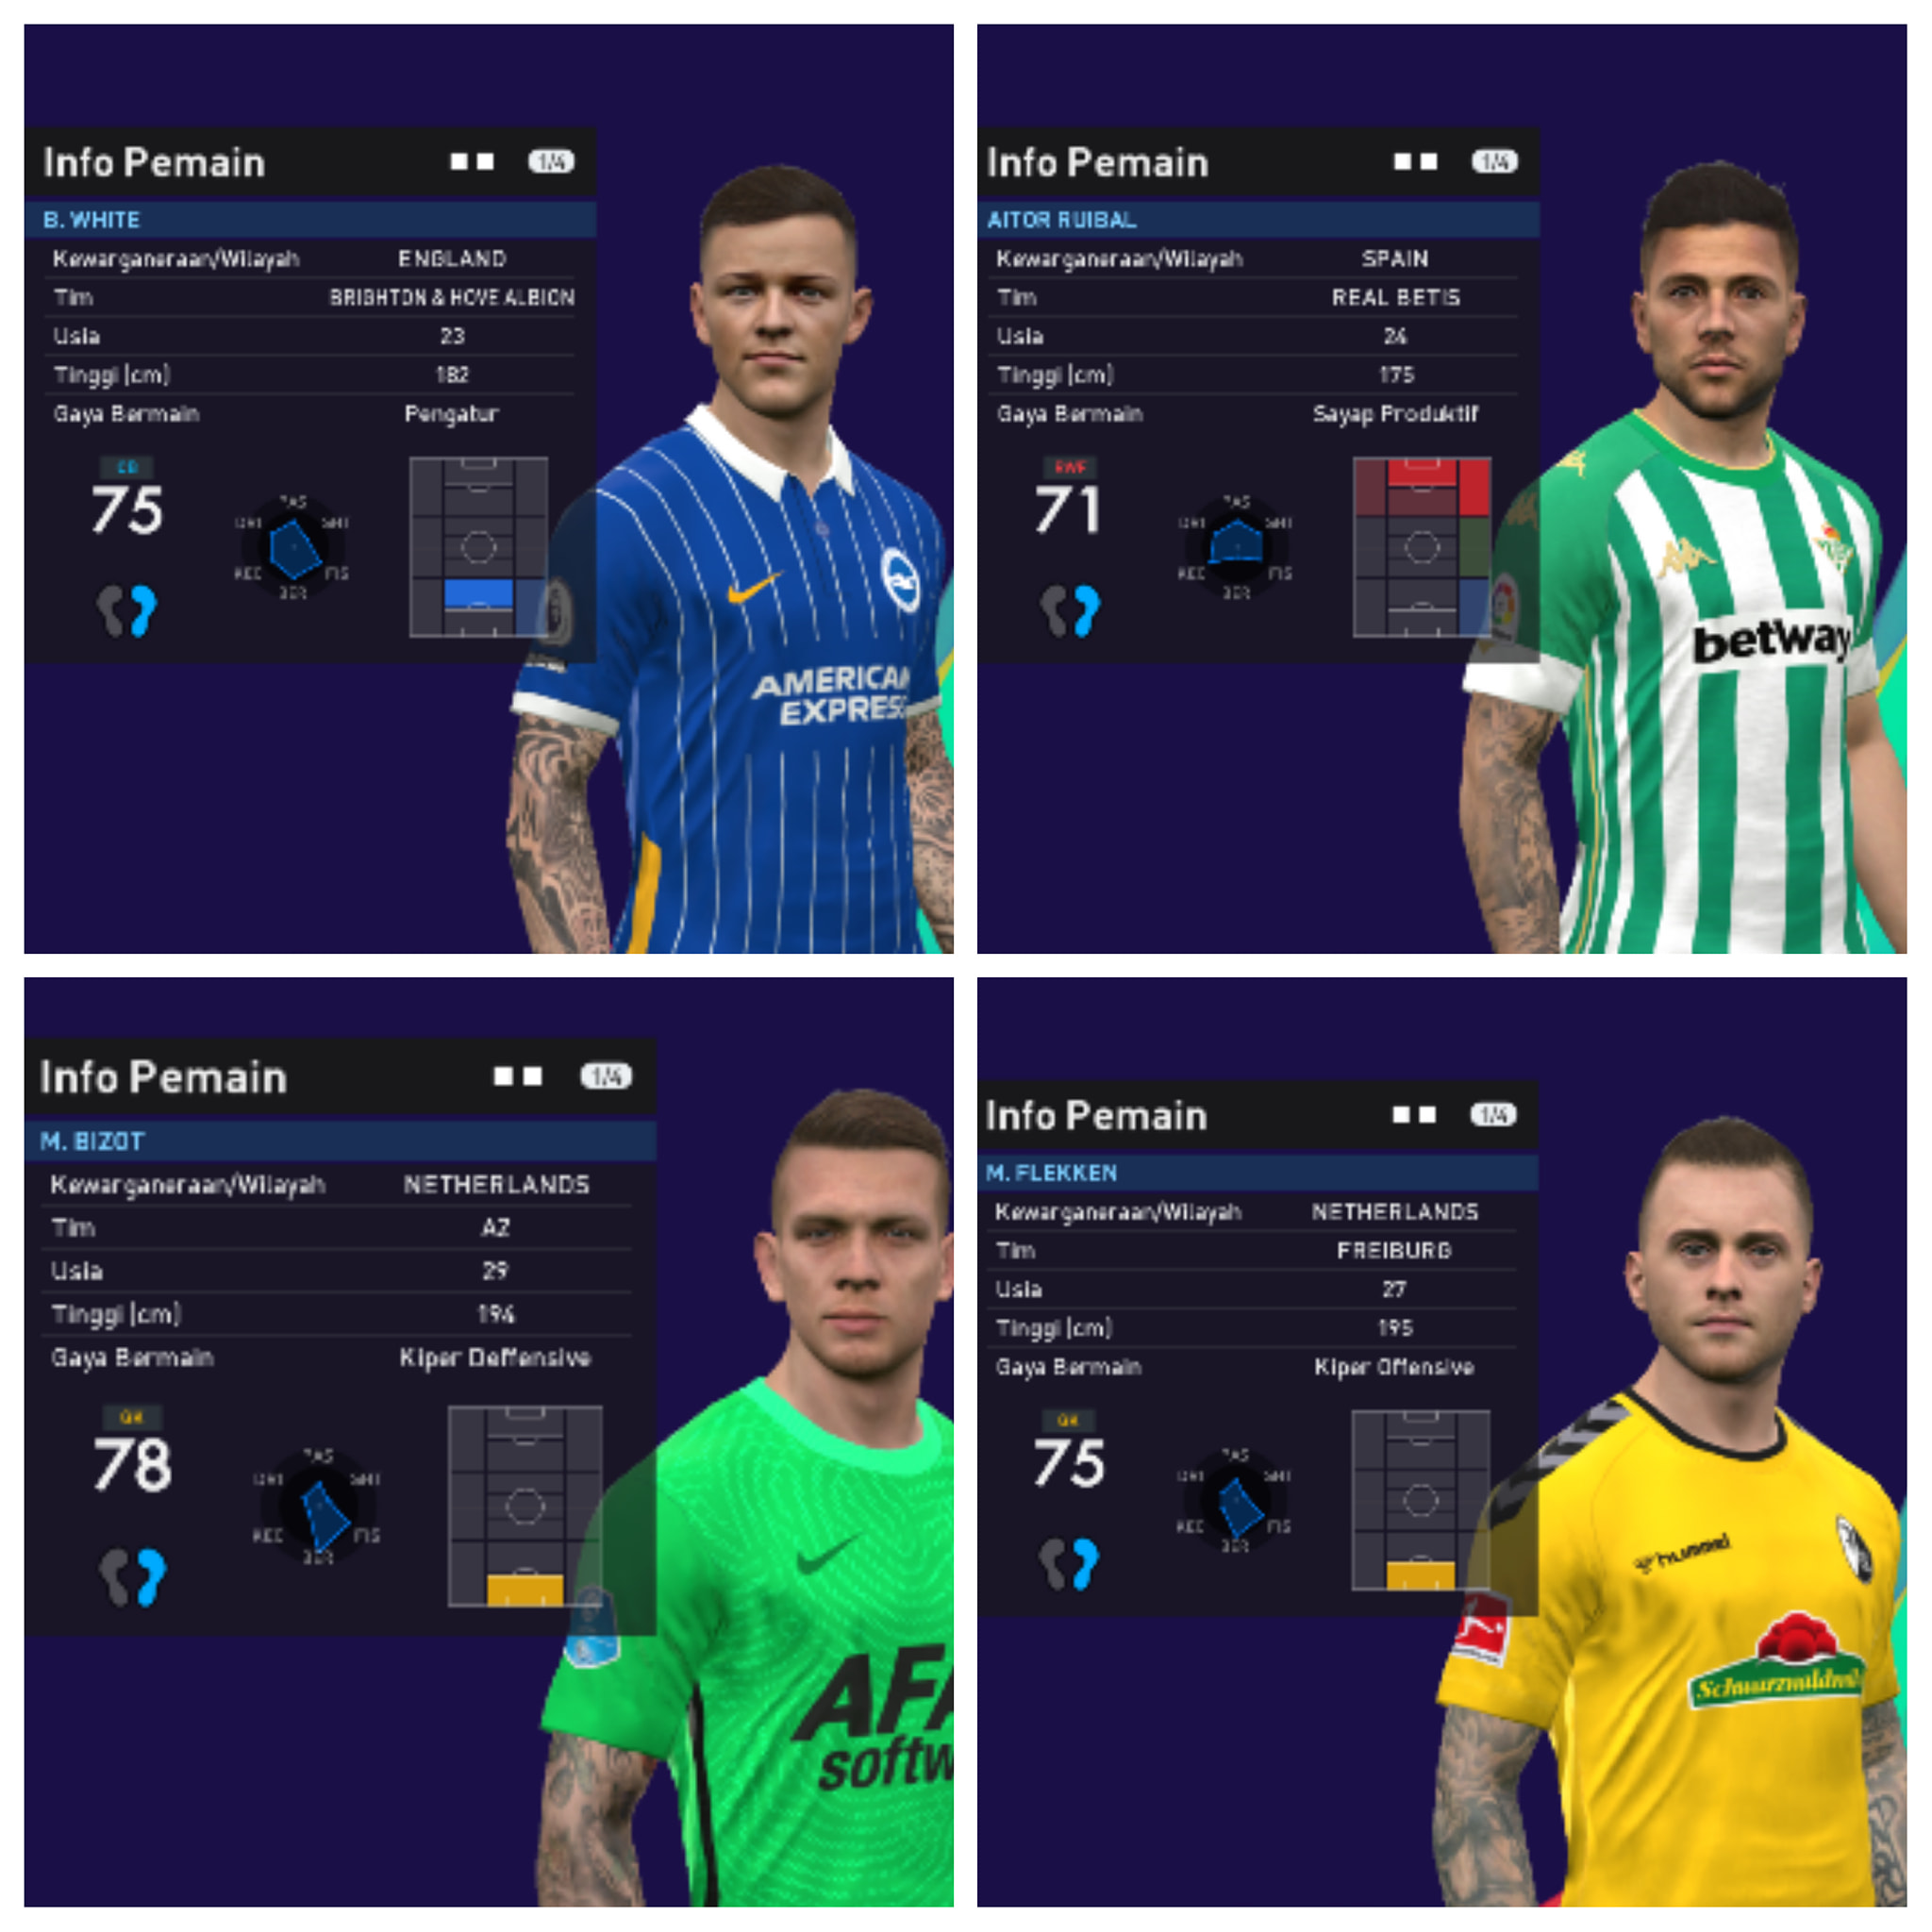 PES 2017 New Mod Full Body V3  RT Tattoo Pack  2019 by Rean Tech   PESNewupdatecom  Free Download Latest Pro Evolution Soccer Patch  Updates